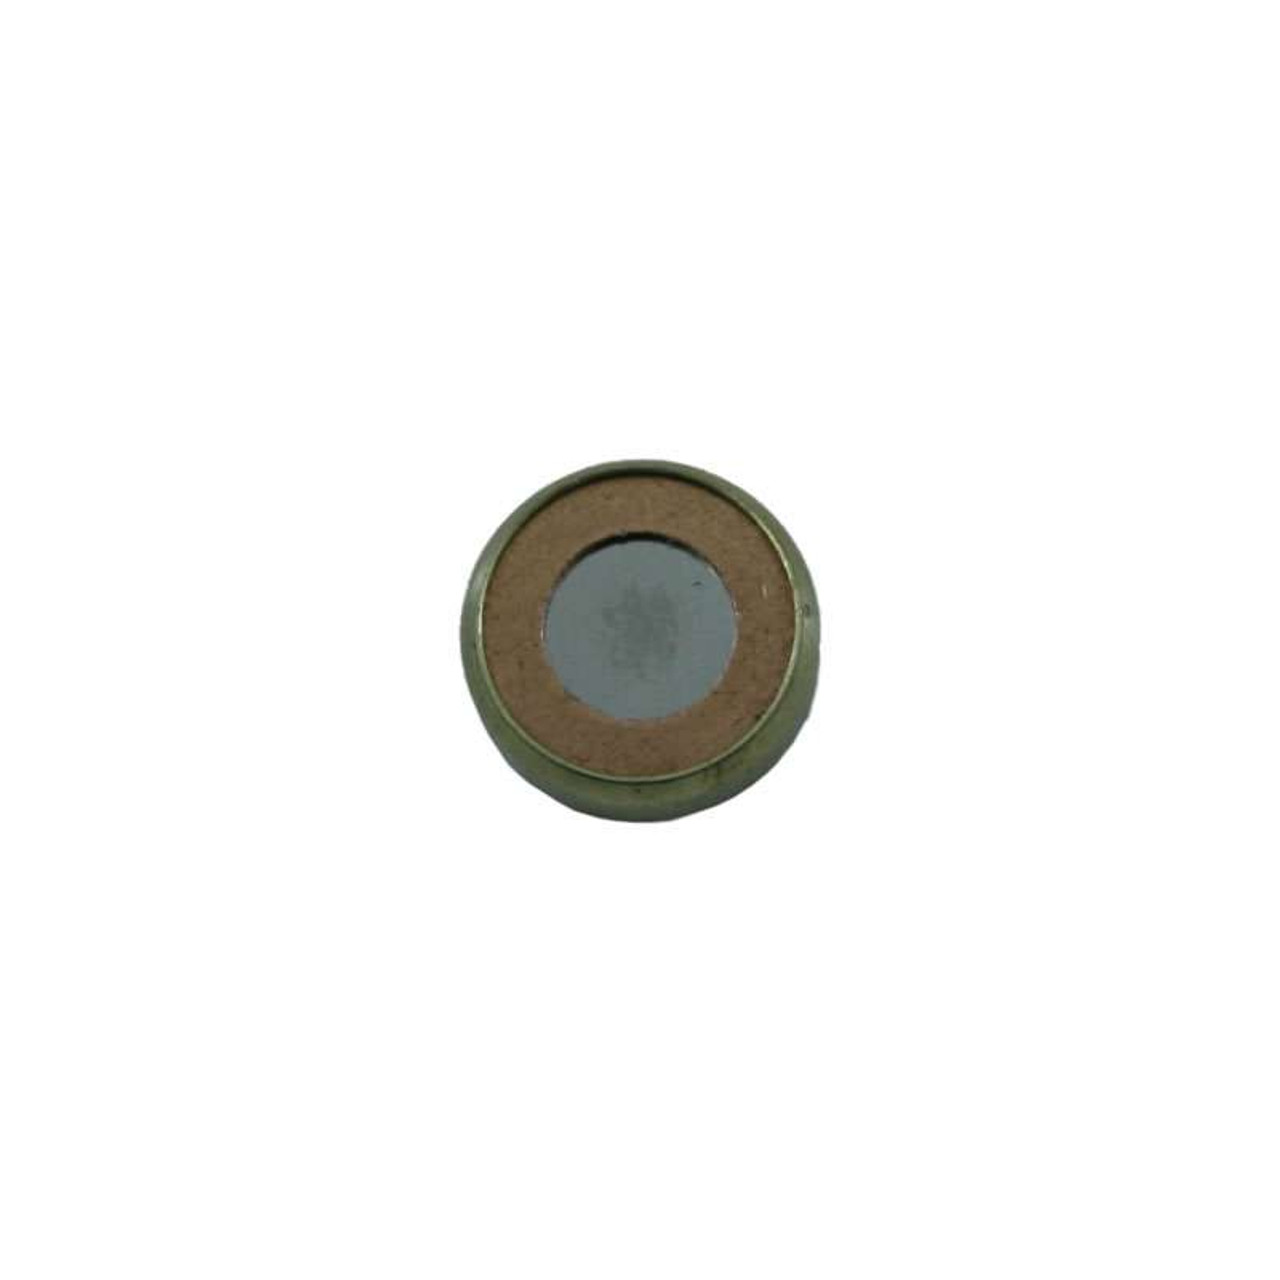 NX Blow-Off Safety Disc 3000psi - NXS11712L